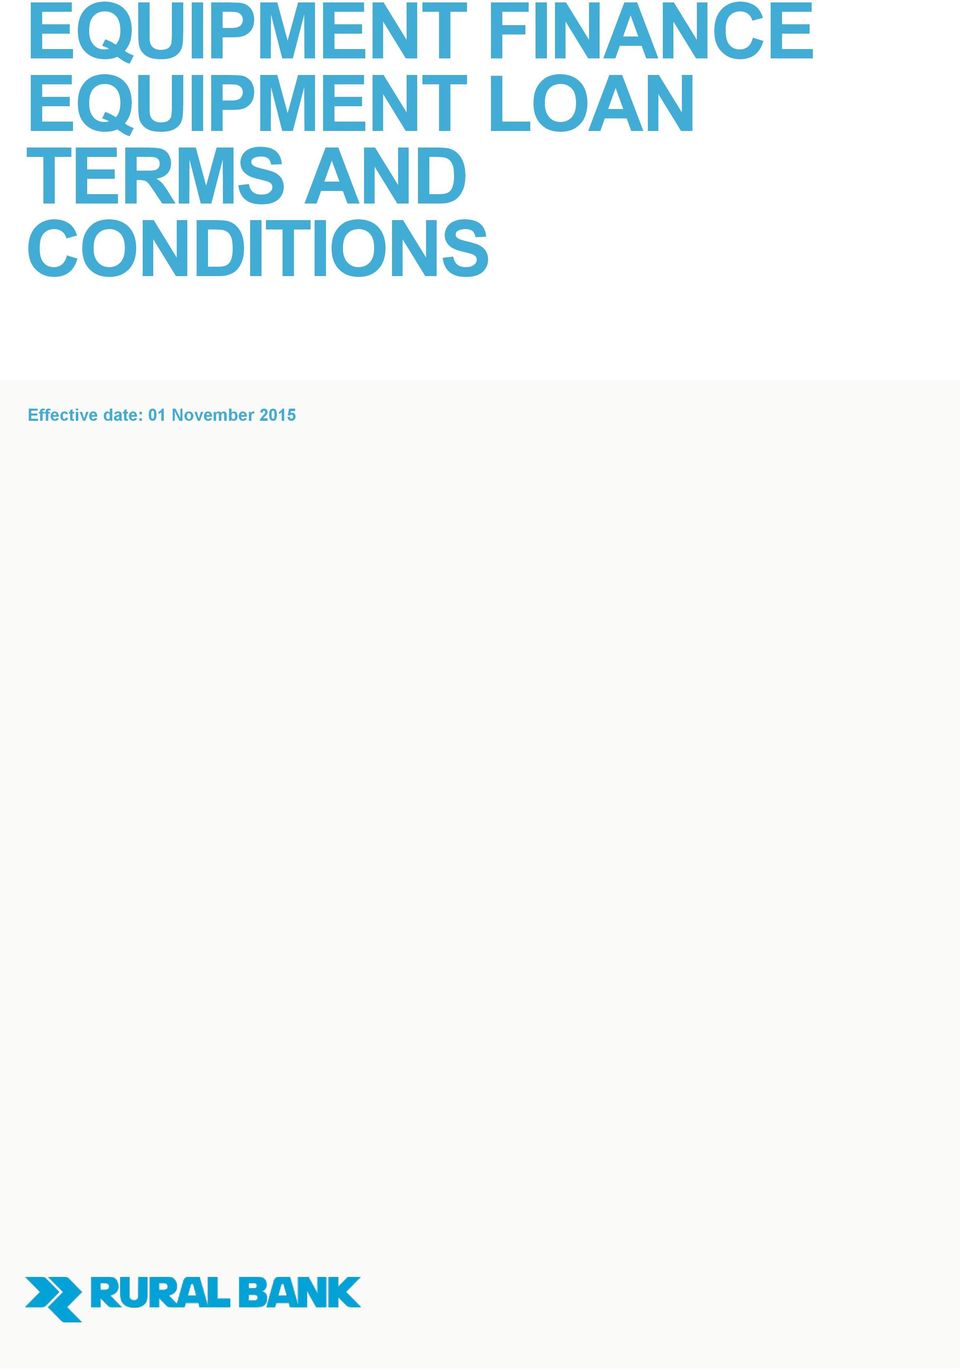 AND CONDITIONS